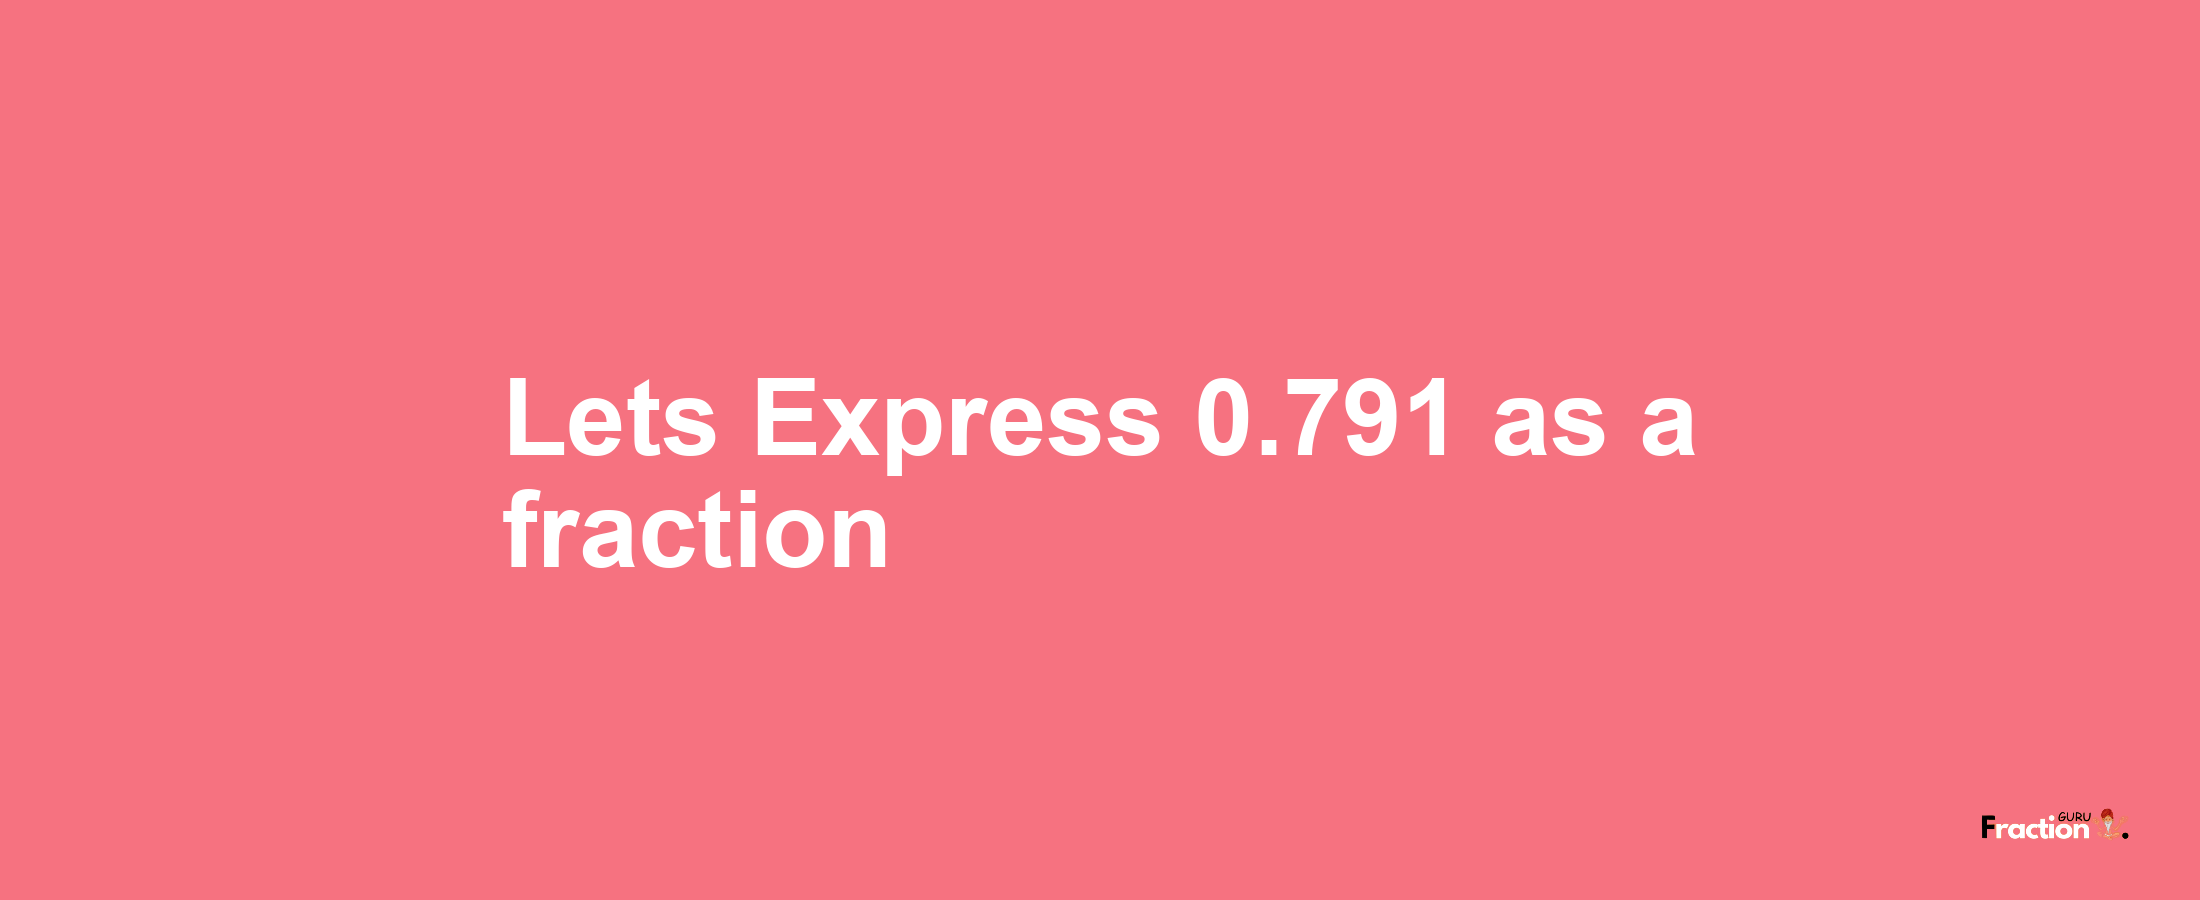 Lets Express 0.791 as afraction